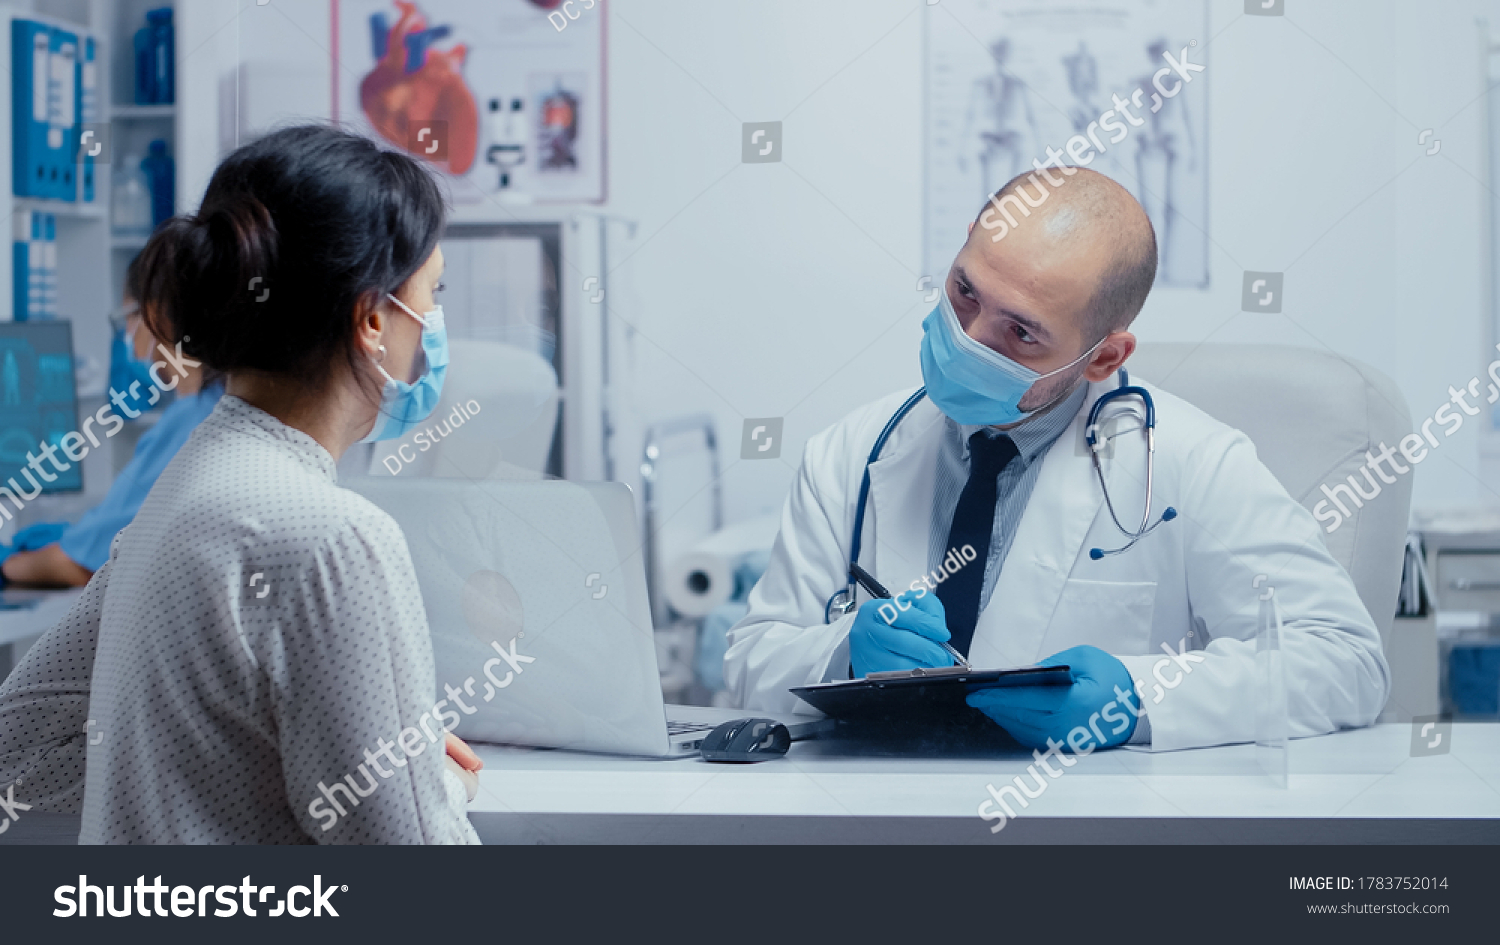 Doctor questioning patient during covid-19 pandemic, writing answears in clipboard. Medical consultation in protective equipment concept shot of sars-cov-2 global health pandemic crisis #1783752014